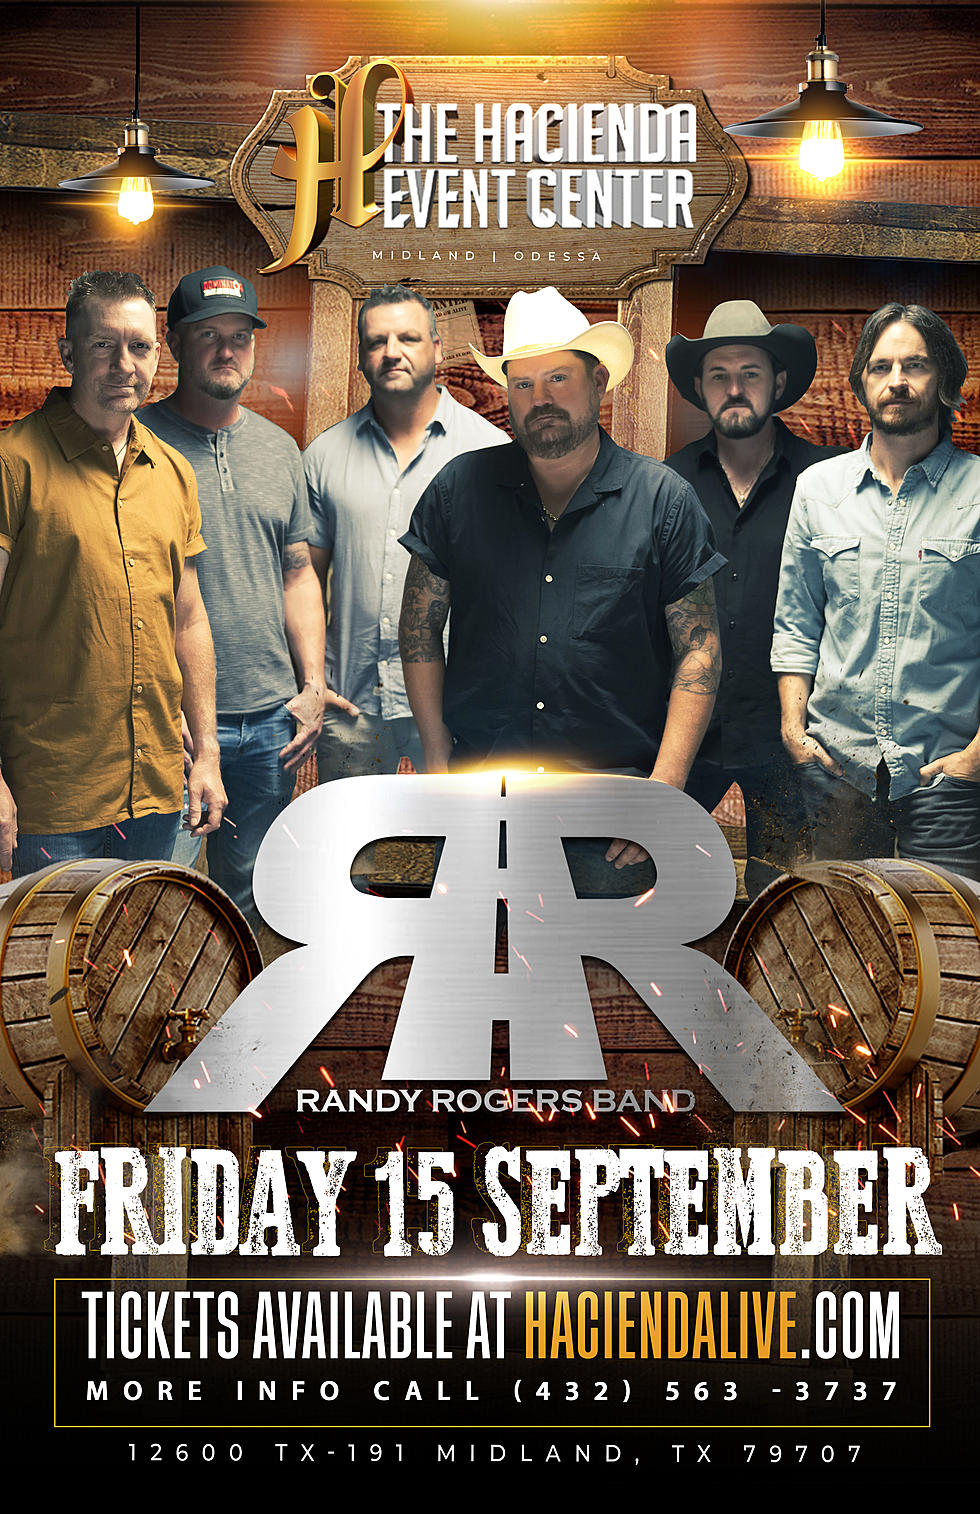 The Randy Rogers Band Is Returning To Hacienda Event Center